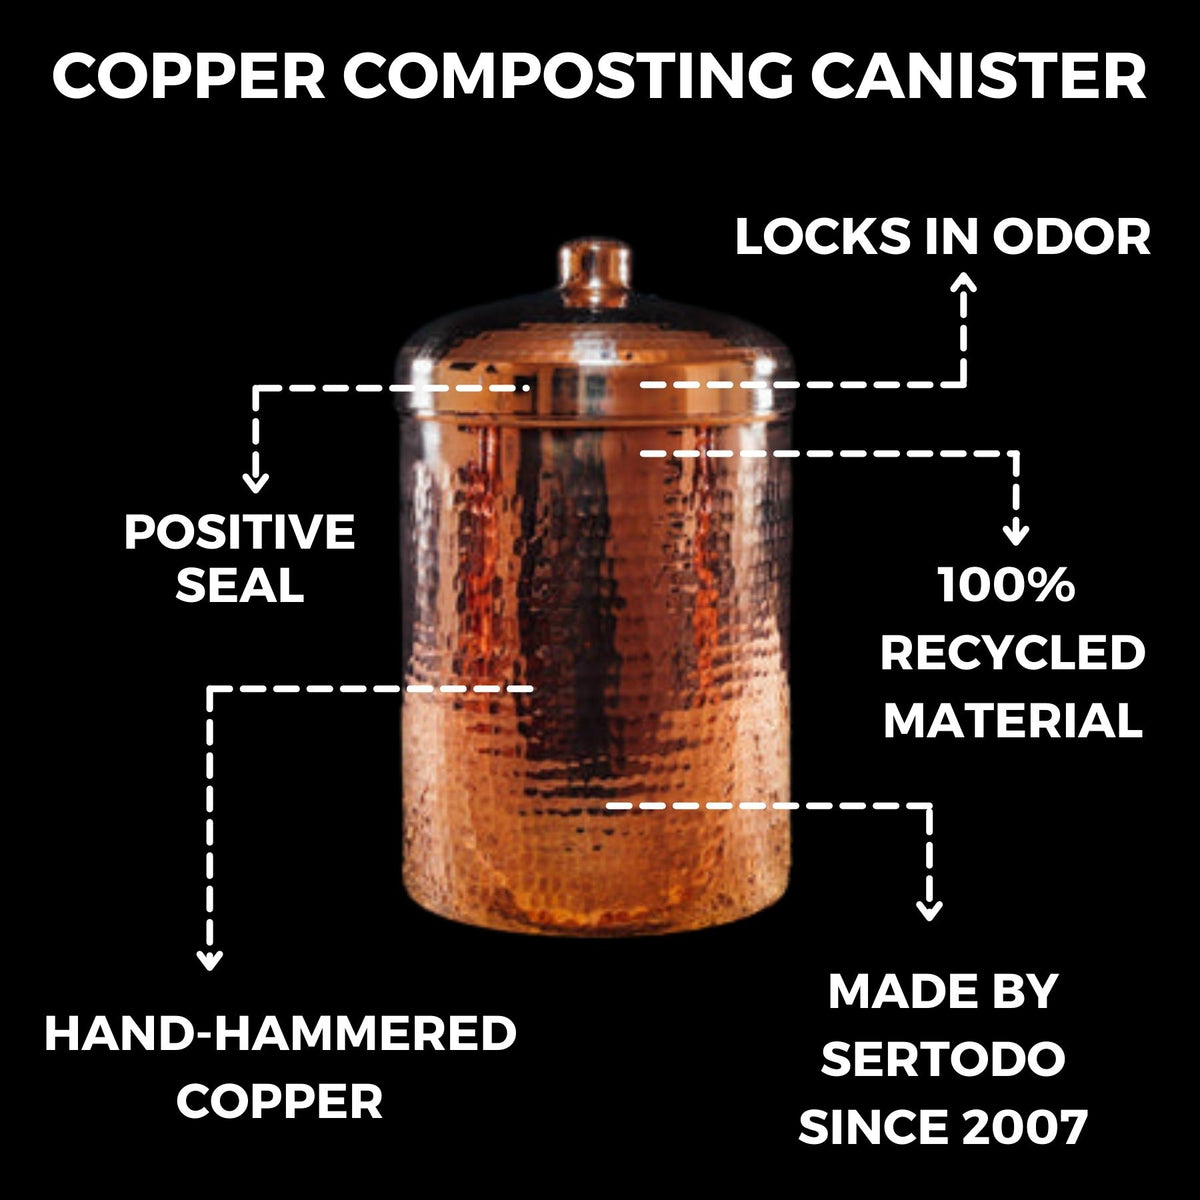 Copper Kitchen Compost Bin (Canisters)